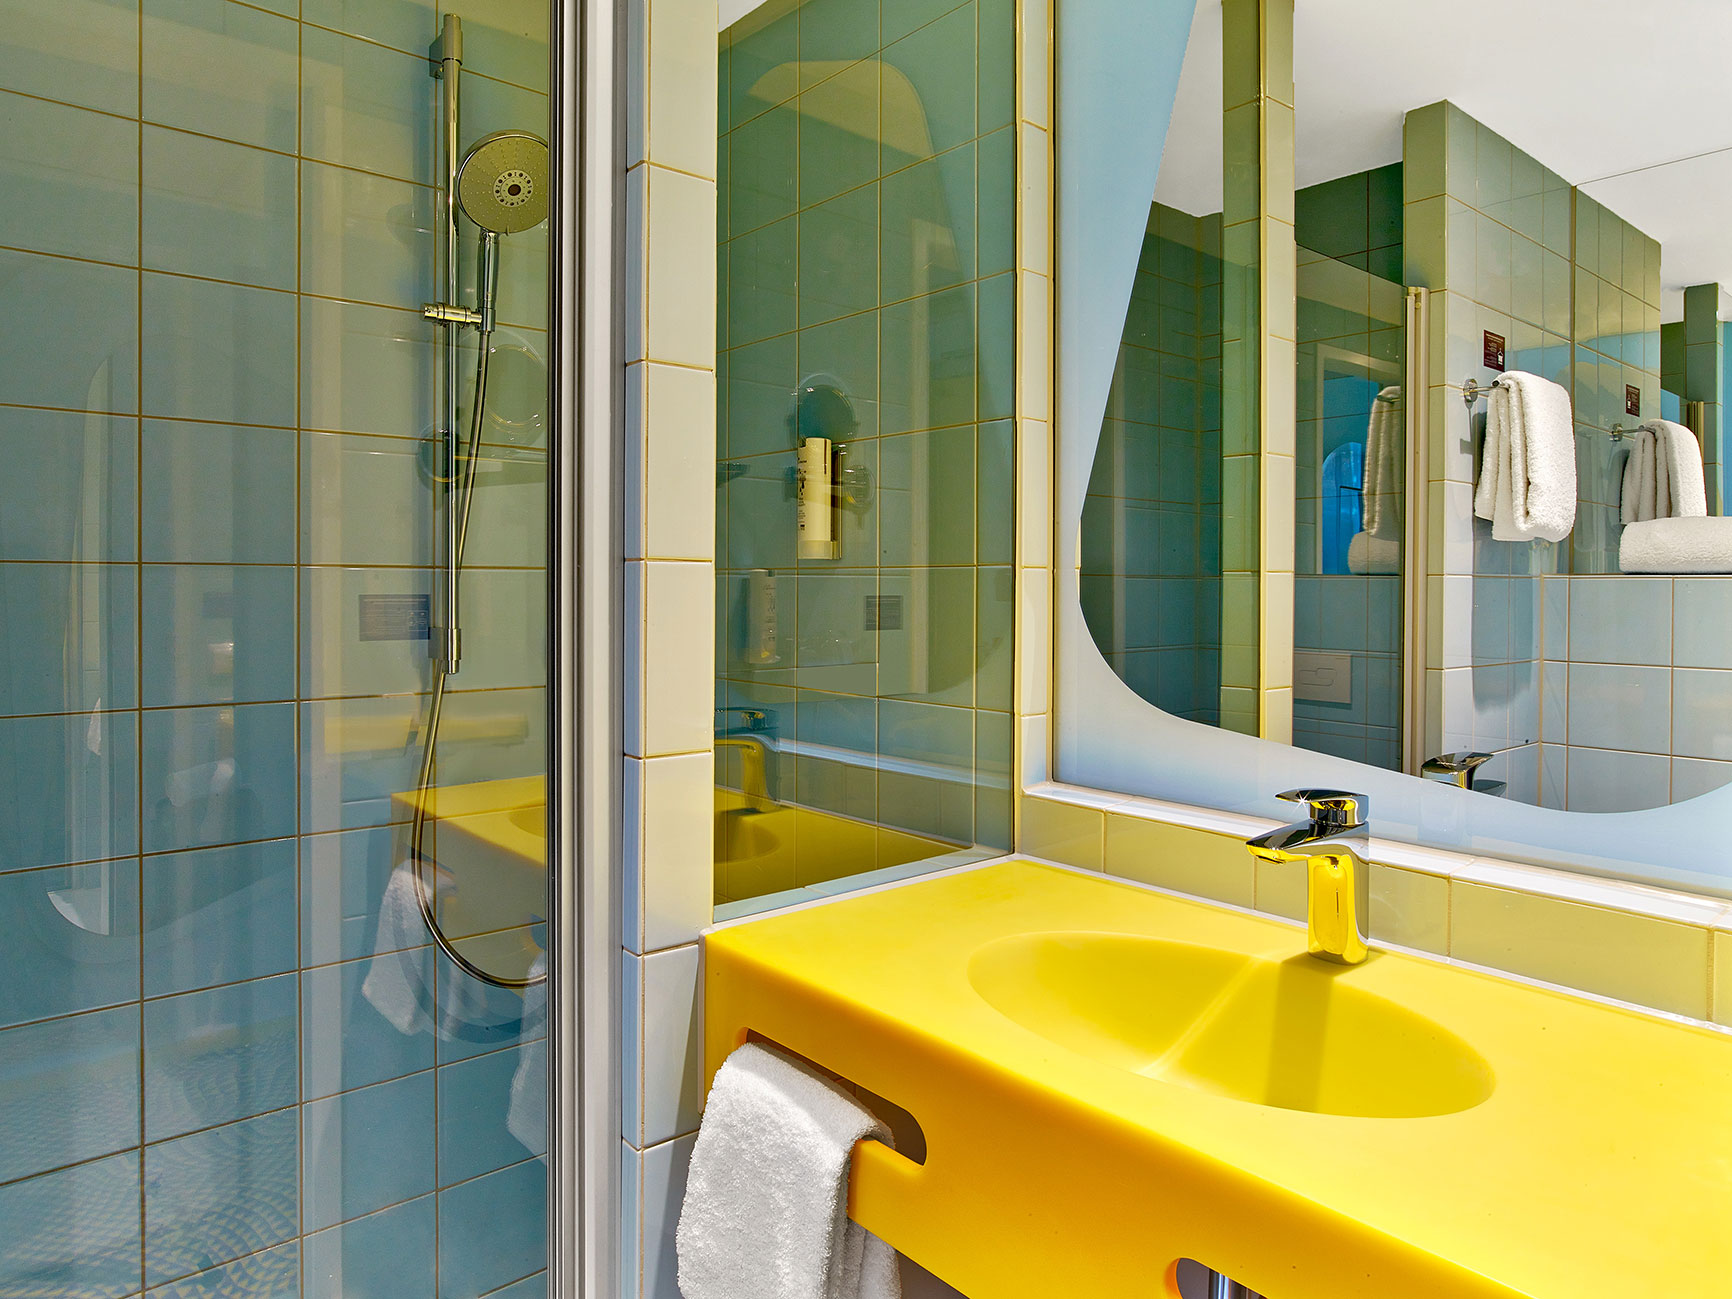 Hotel bathroom with a yellow sink, a shower cabin and blue tiles